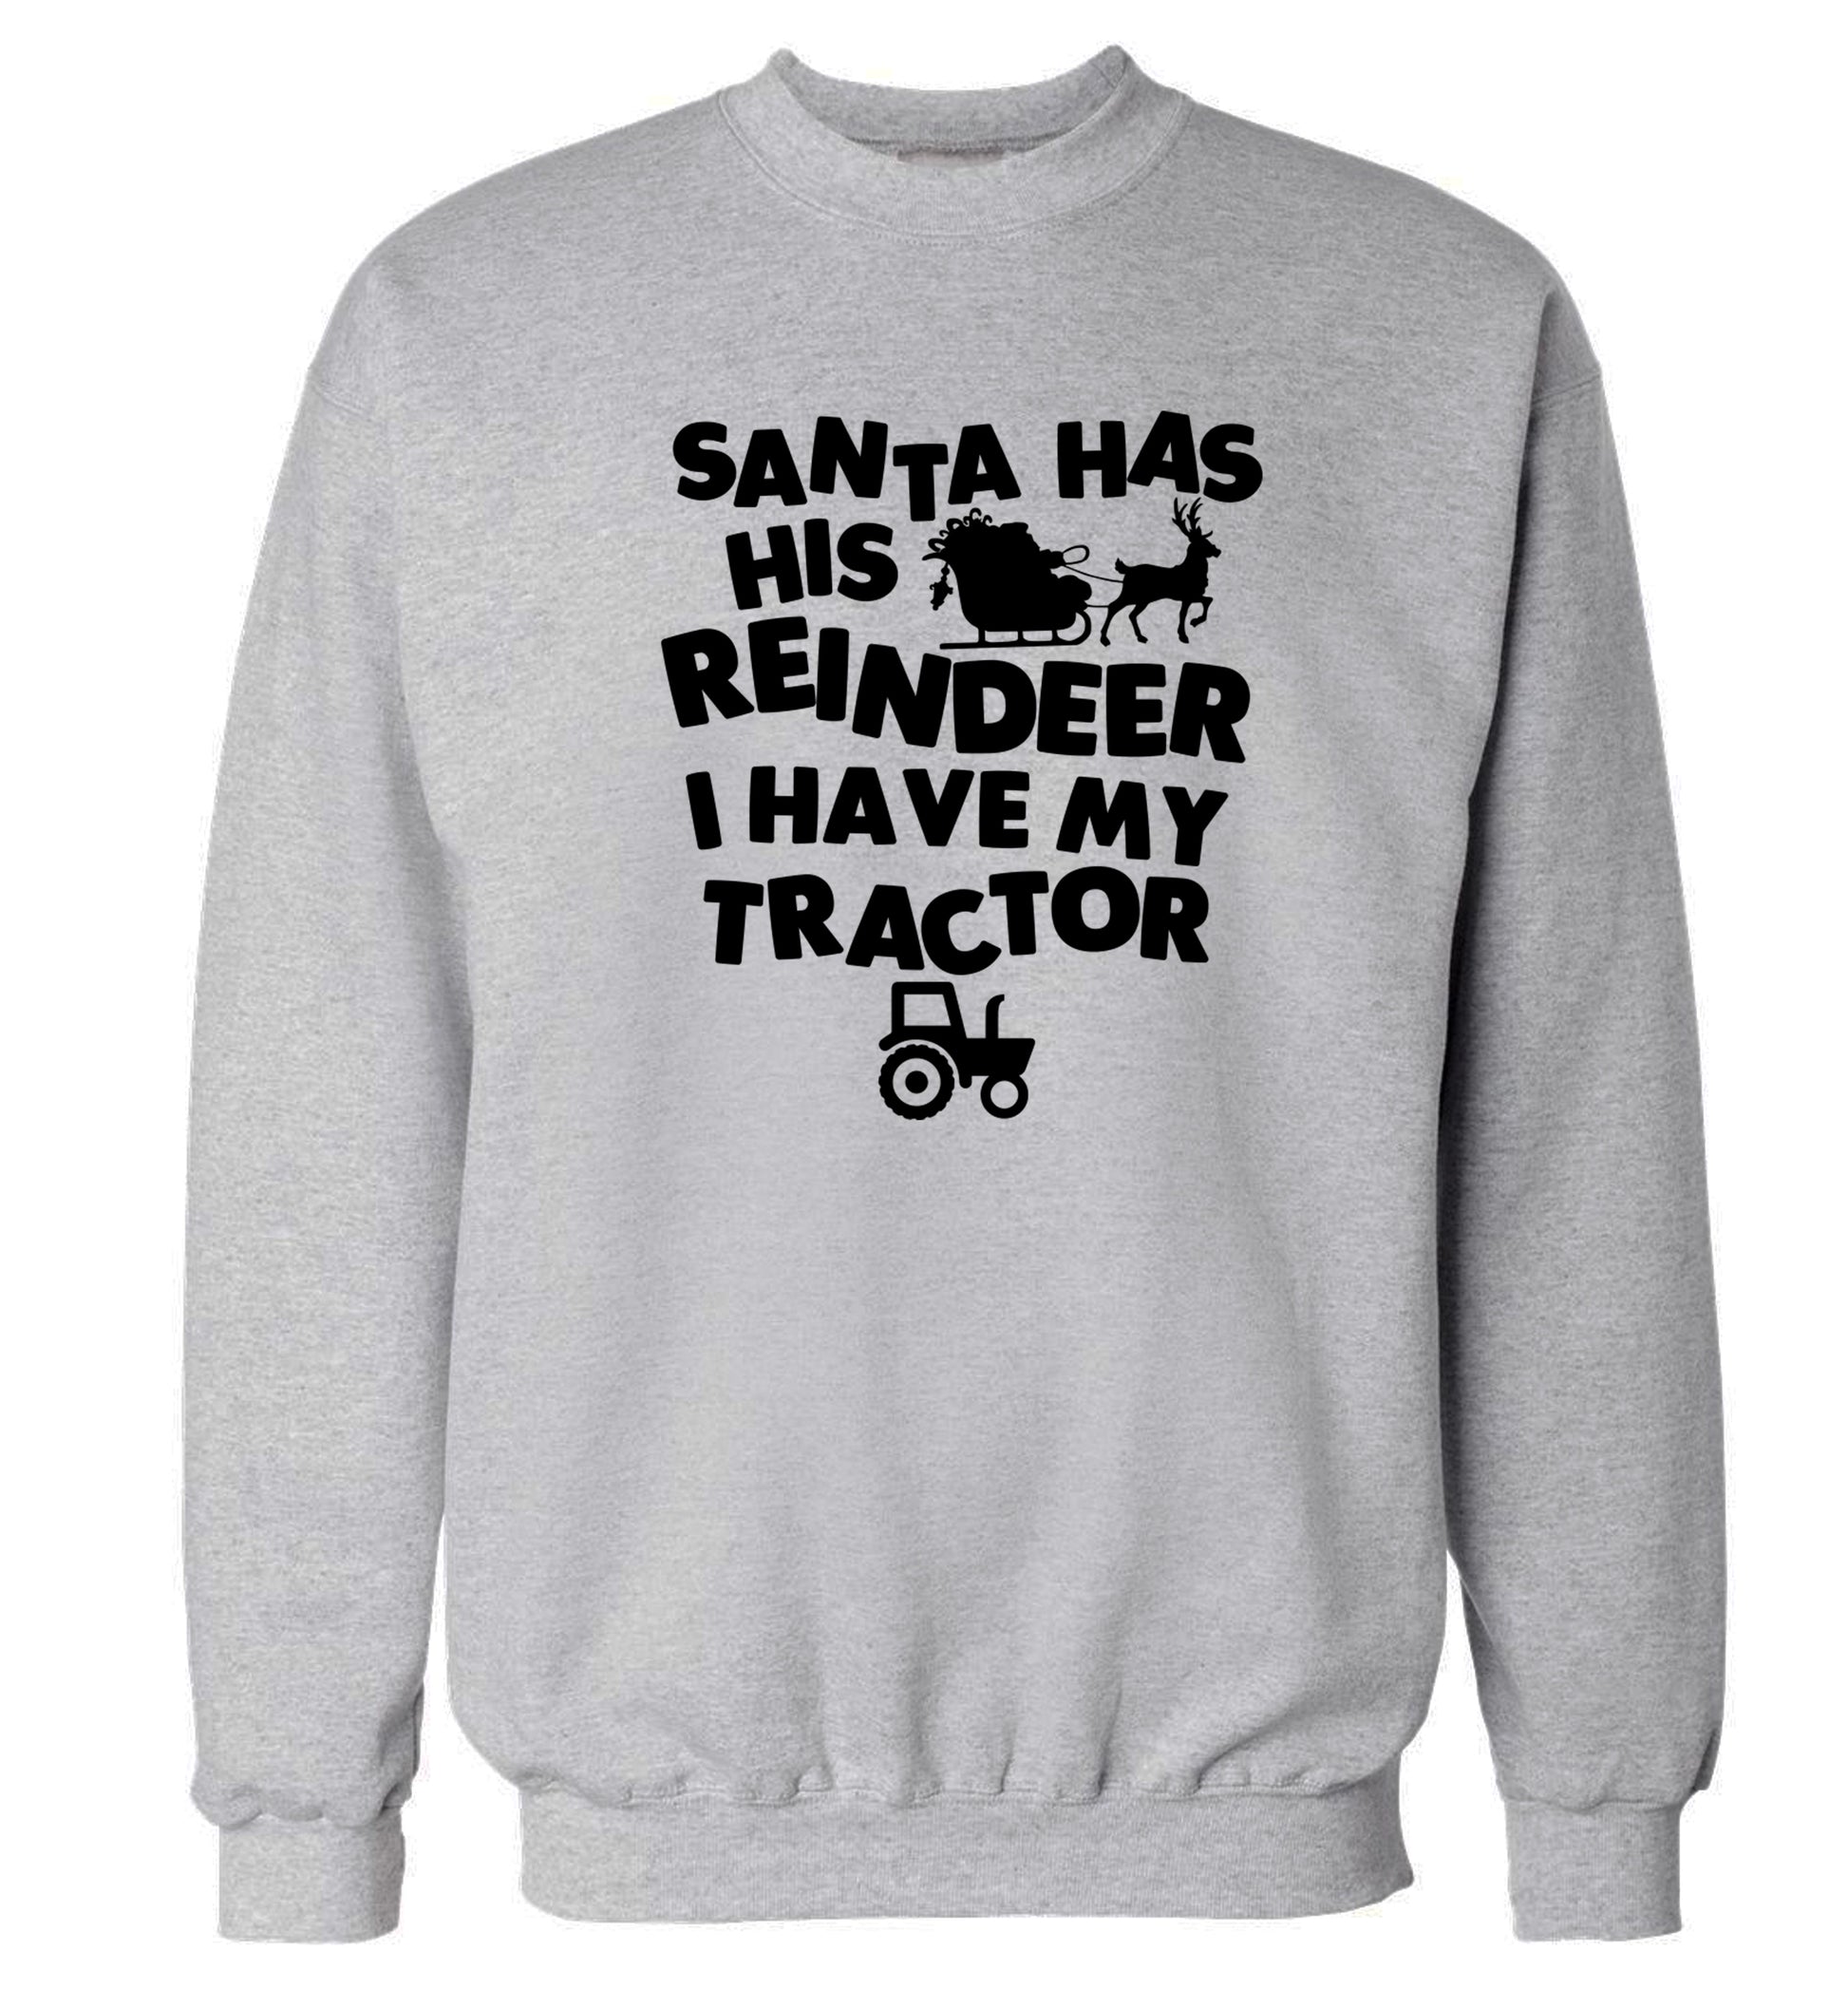 Santa has his reindeer I have my tractor Adult's unisex grey Sweater 2XL